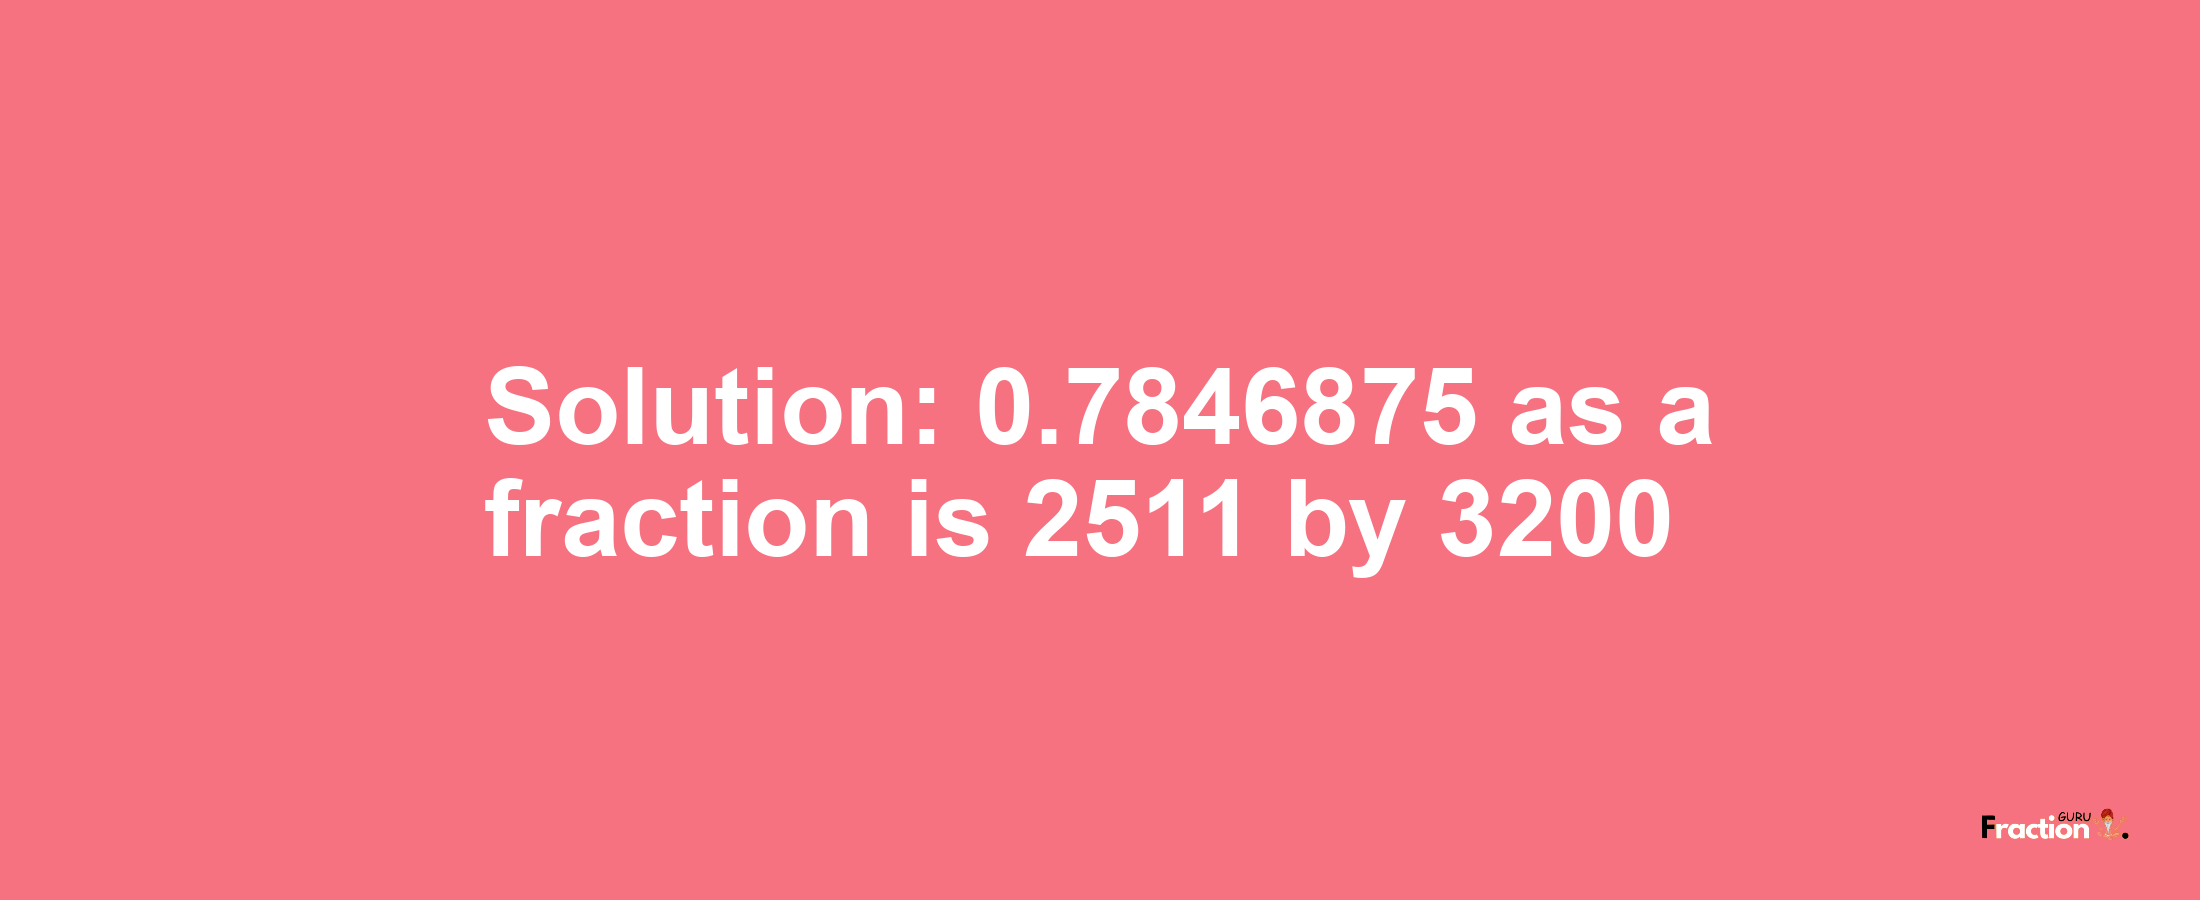 Solution:0.7846875 as a fraction is 2511/3200